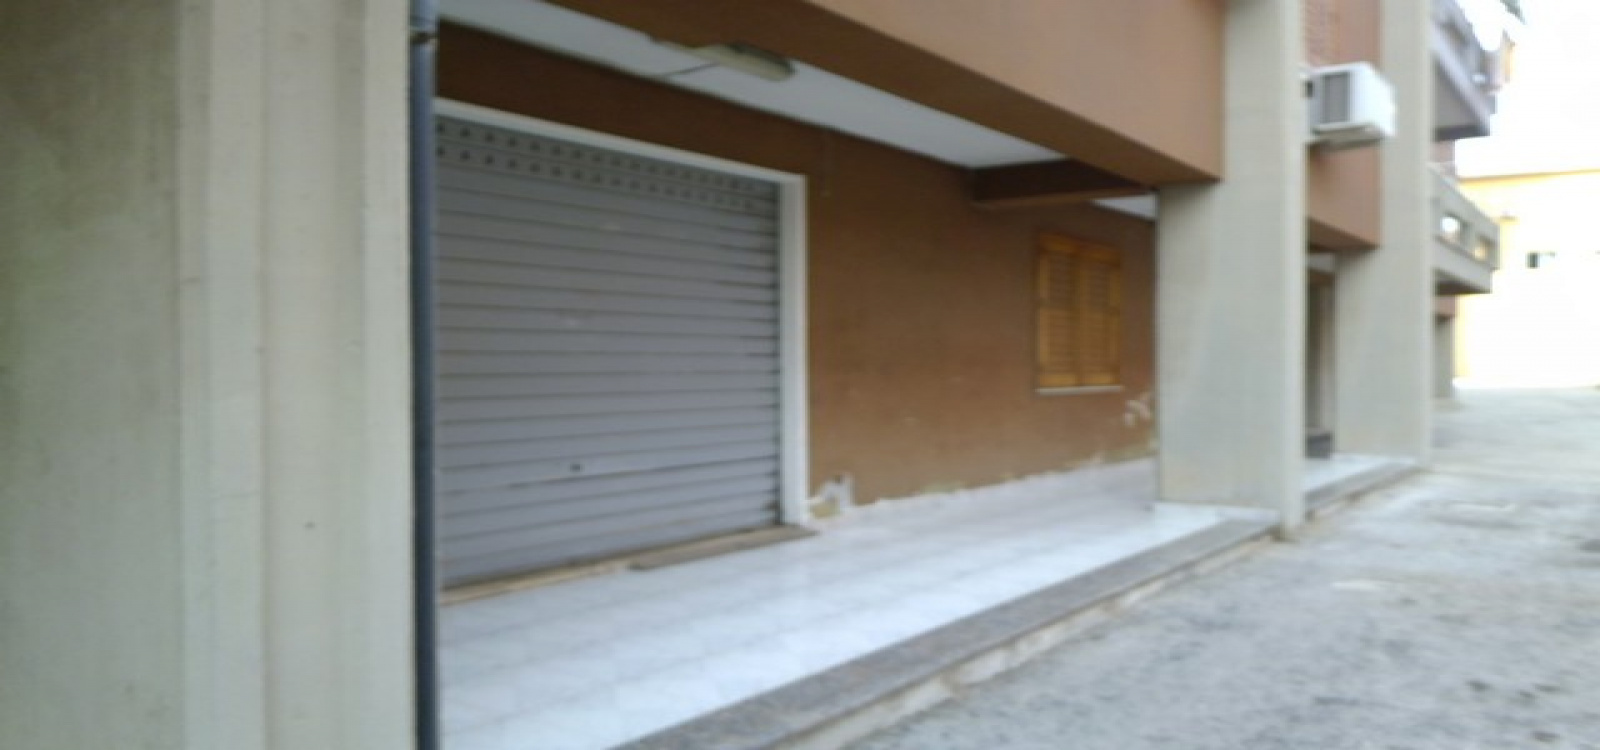 Viale Teracati,Siracusa,Commerciale,Viale Teracati,1031